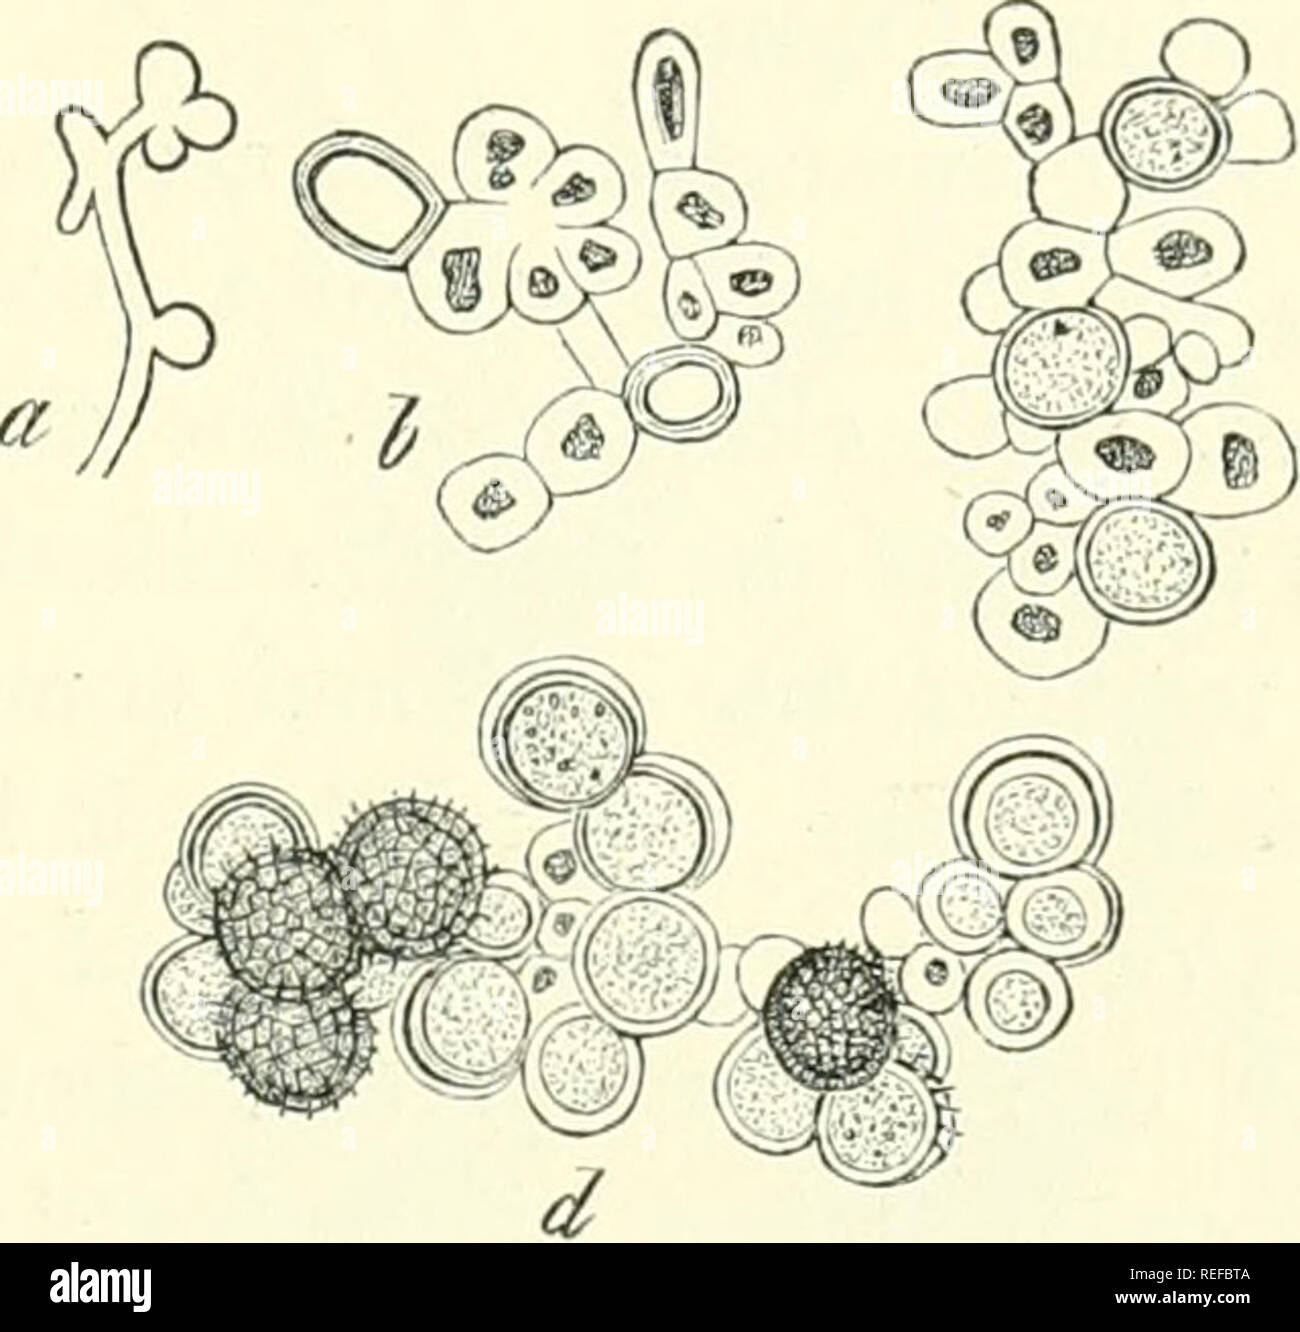 . Comparative morphology and biology of the fungi, mycetozoa and bacteria. Fungi -- Morphology; Bacteria -- Morphology. FIG. 81. a and b Entyloma Calendulae. a mycelial filament with two young resting-spores. * resting-spore germinating; the front pair of primary sporidia in the whorl shows conjugation at the base, c and d Entyloma Ungerianum, DeBary. cagerminatingresting-spore; four primary sporidia conjugating by pairs at their apices, d the same specimen seven hours later ; commencement of the abjointing of a secondary sporidium (gonidium) on each pair. Magn. 600 times. FlG. 82. Development Stock Photo